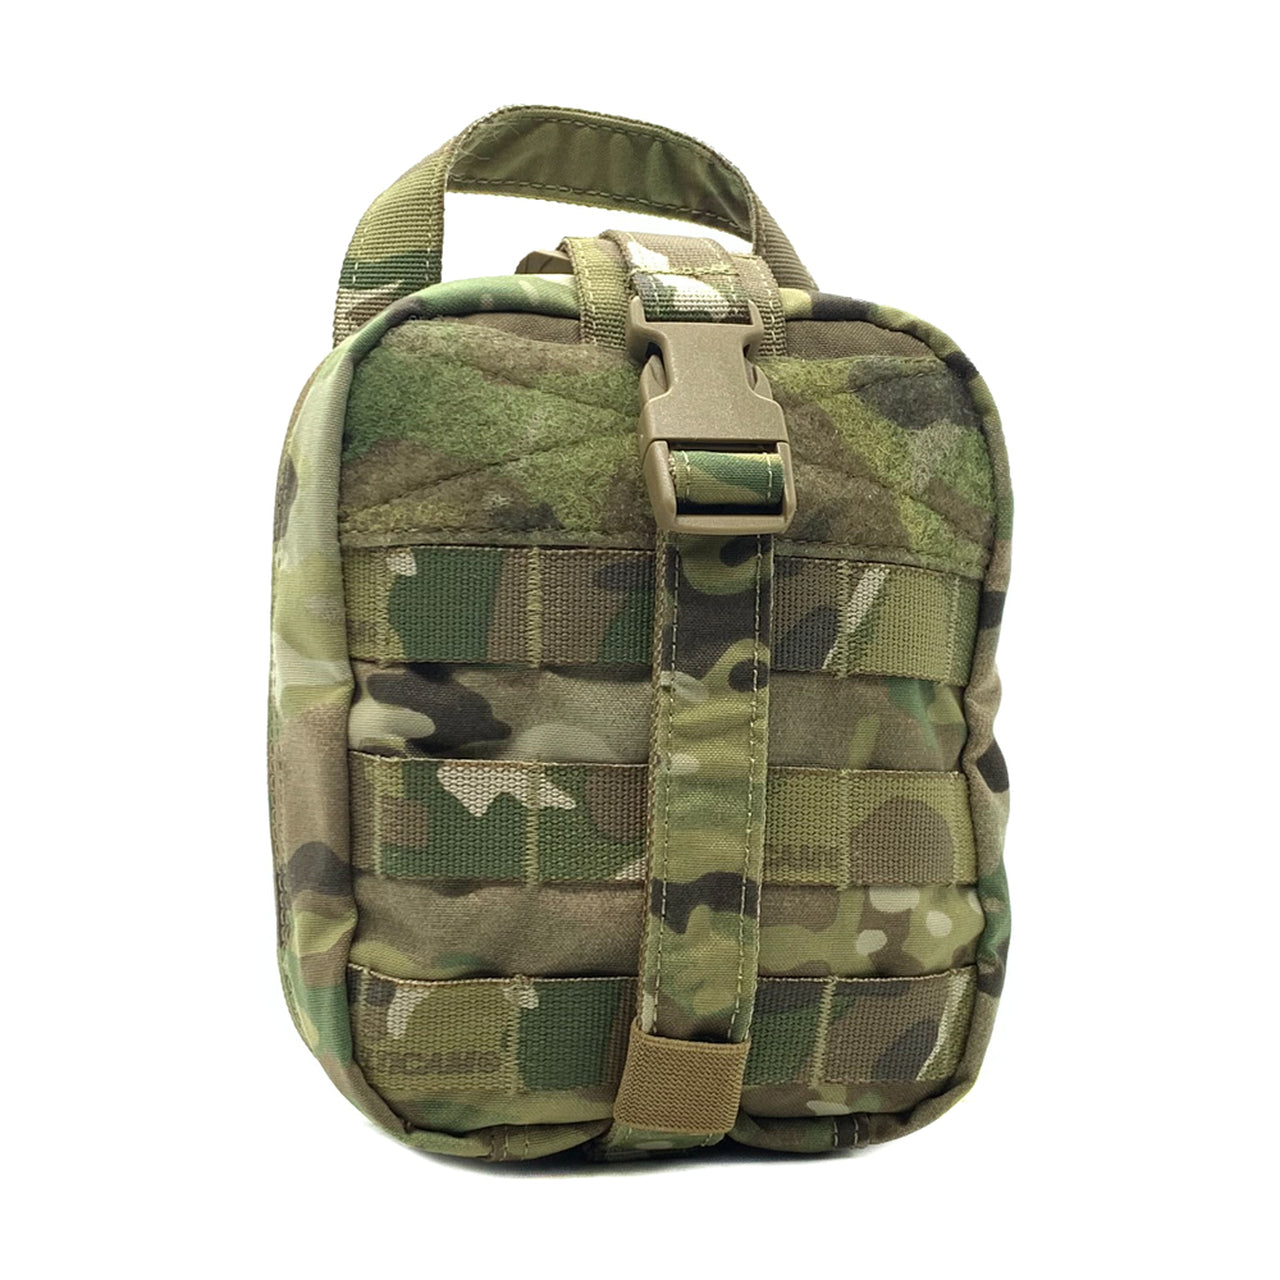 A multicam medical pouch featuring the Shellback Tactical Rip Away Individual First Aid (IFAK) Medic Pouch and MOLLE systems, designed to hold essential medical equipment such as tourniquets. The pouch is showcased.